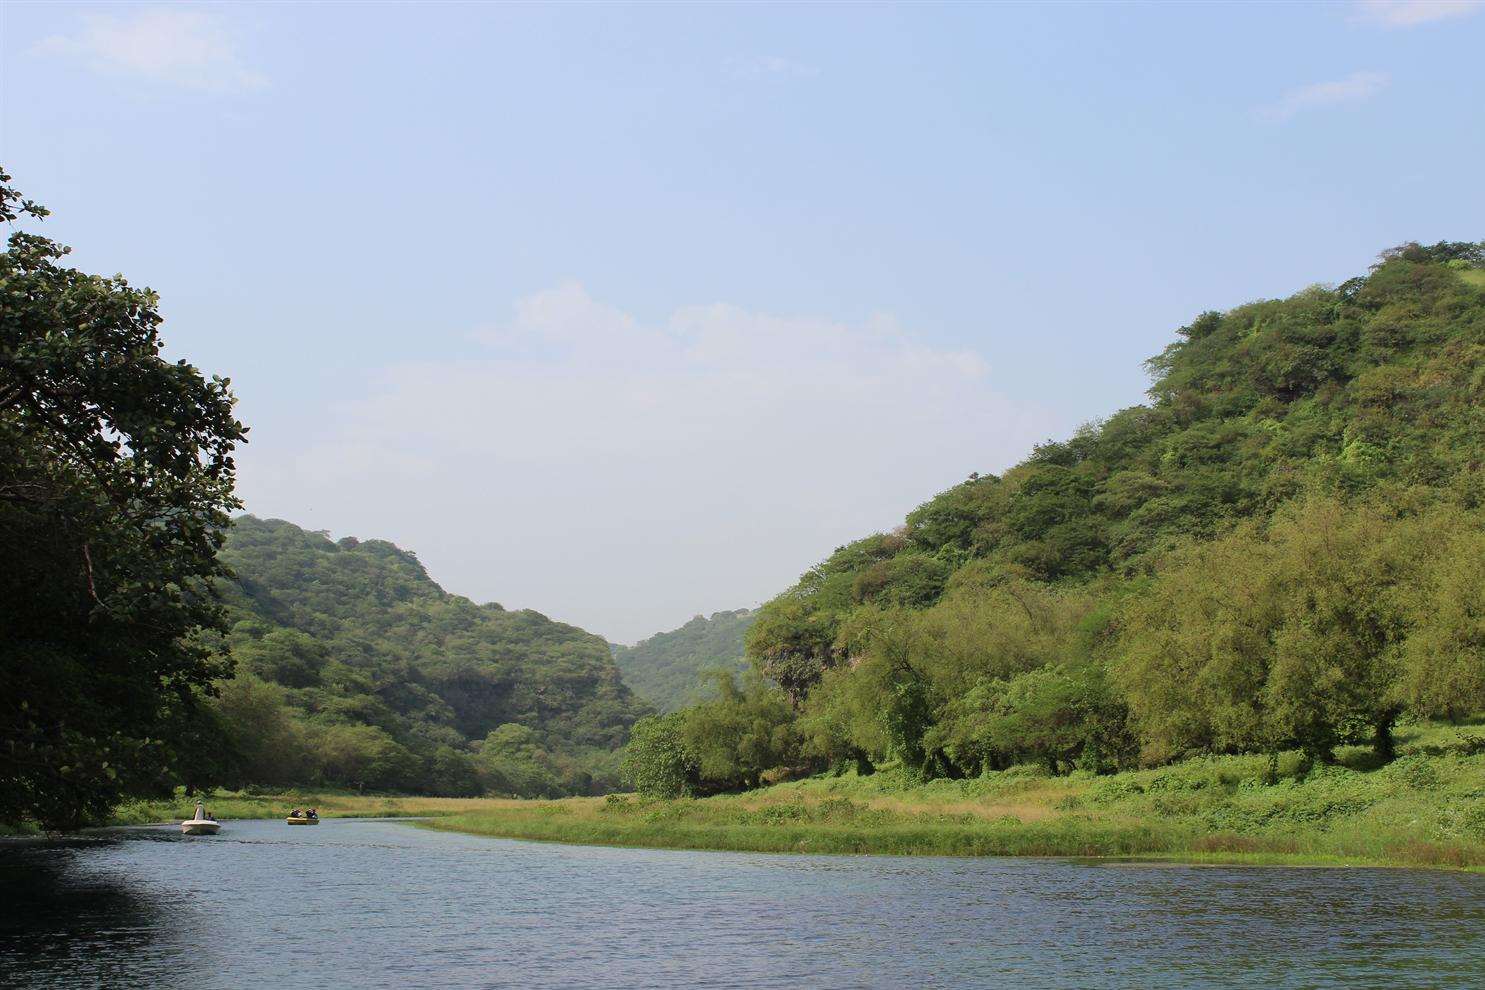 Darbat valley in Salalah, Oman. Picture: Ed McConnell